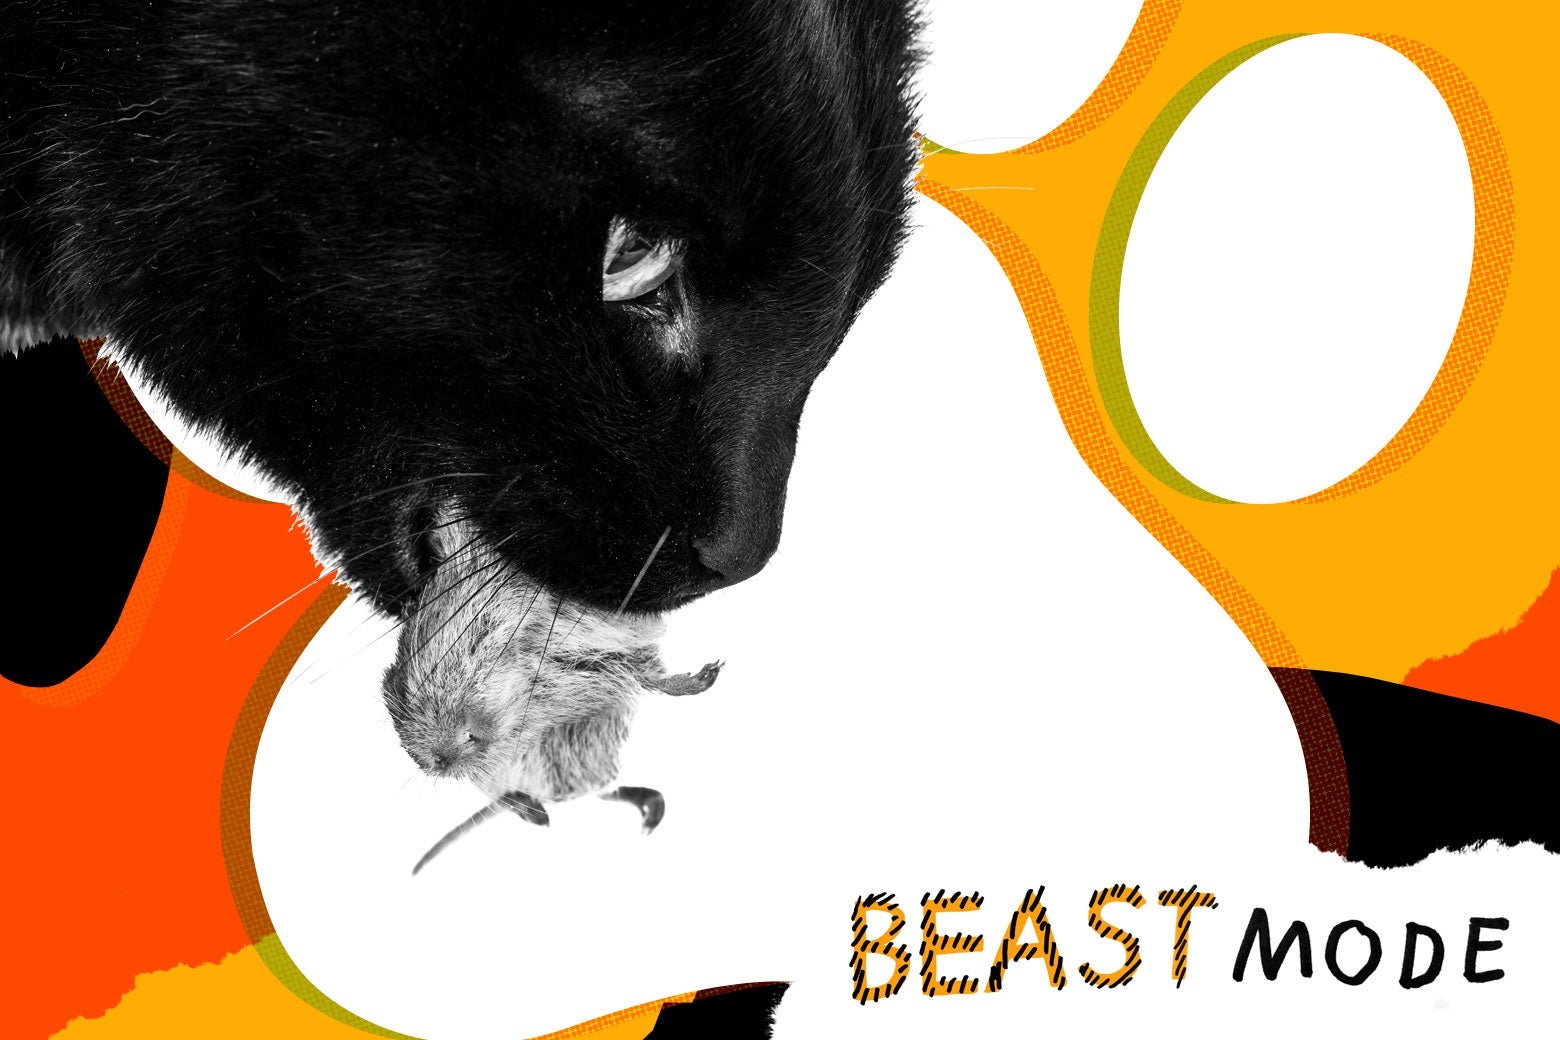 My cat kills small animals and brings them home: pet advice from Beast Mode.